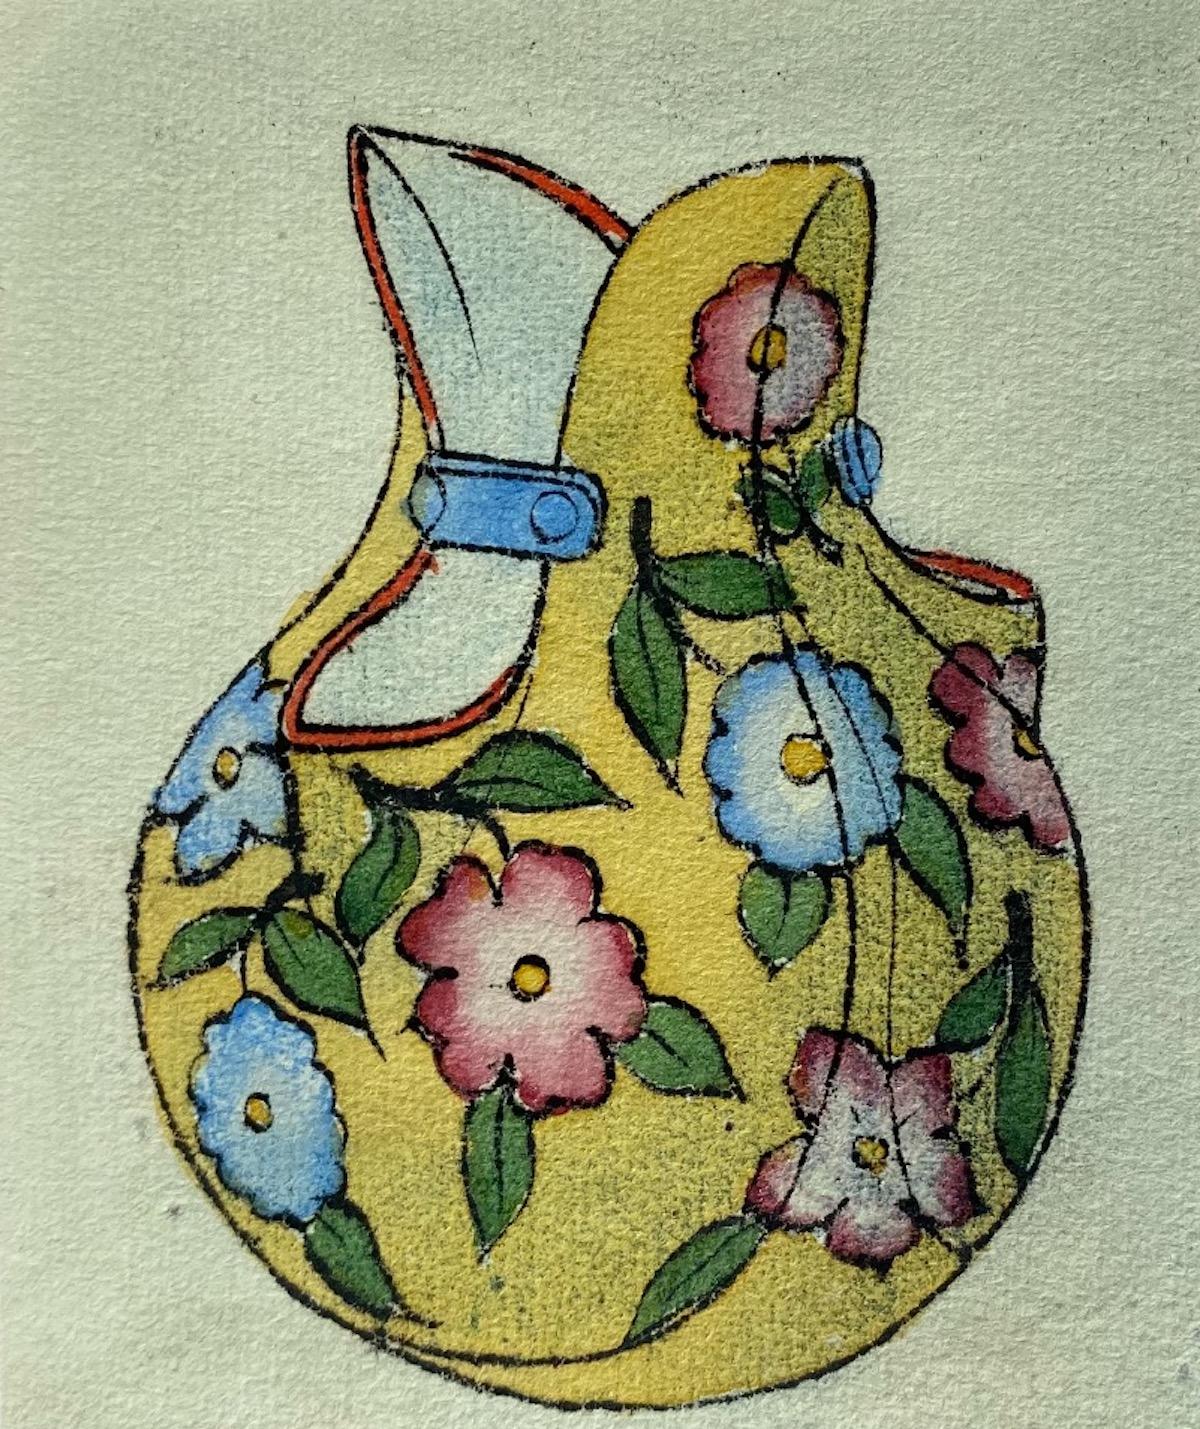 Unknown Figurative Art - Porcelain Vase - China Ink and Watercolor - 1890s